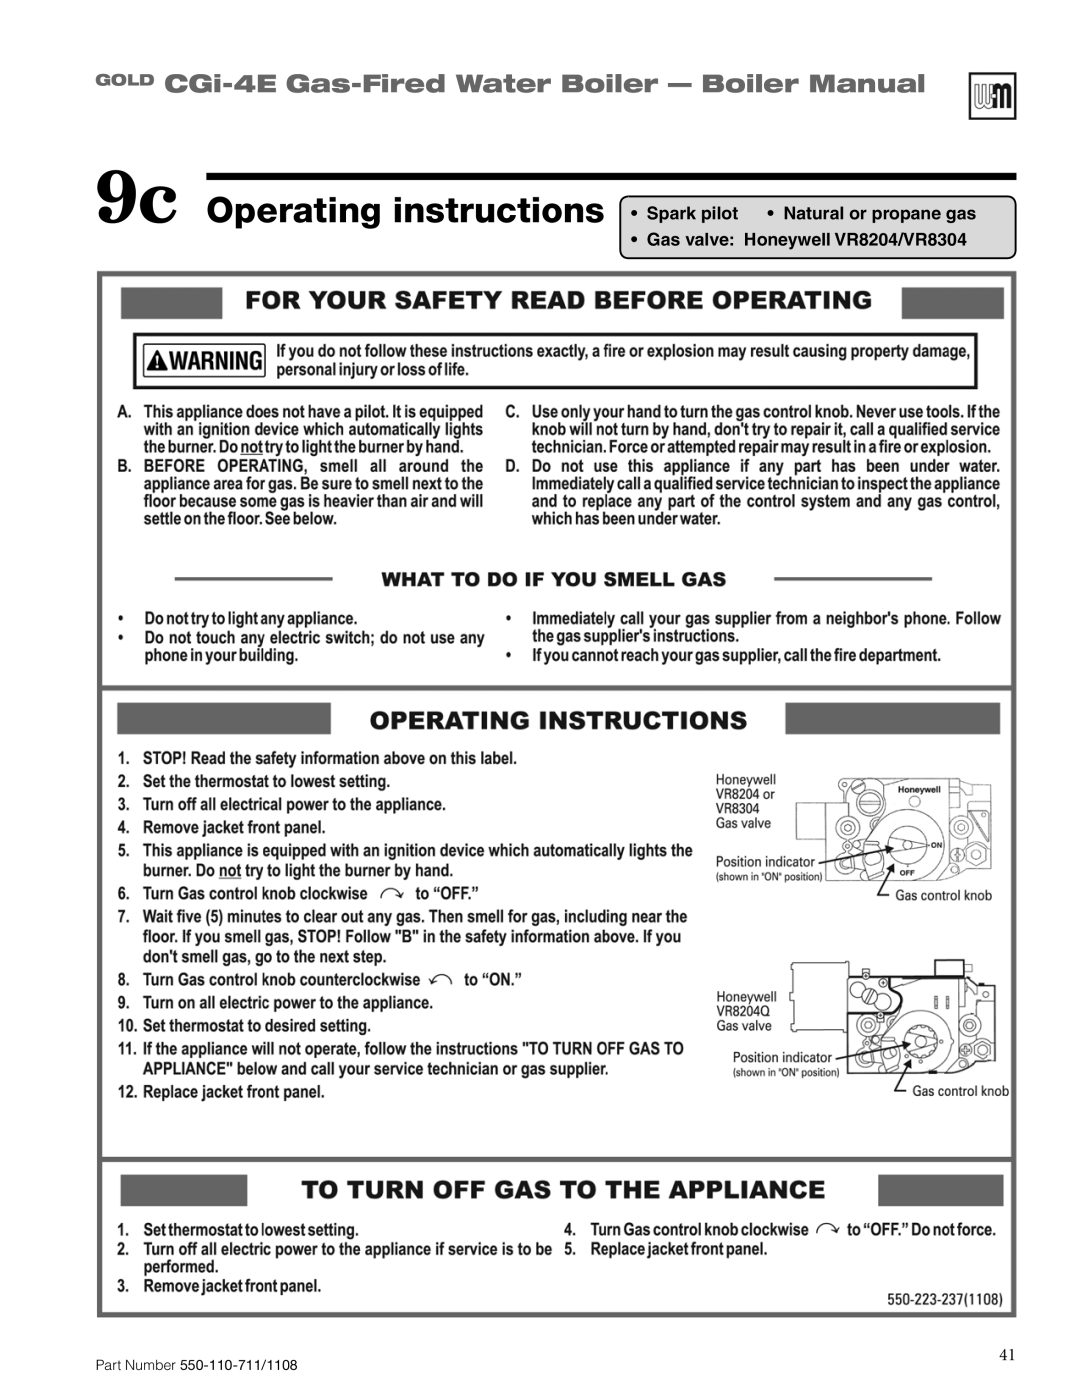 Weil-McLain CGI-4E Operating instructions, GOLD CGi-4E Gas-FiredWater Boiler - Boiler Manual, Part Number 550-110-711/1108 